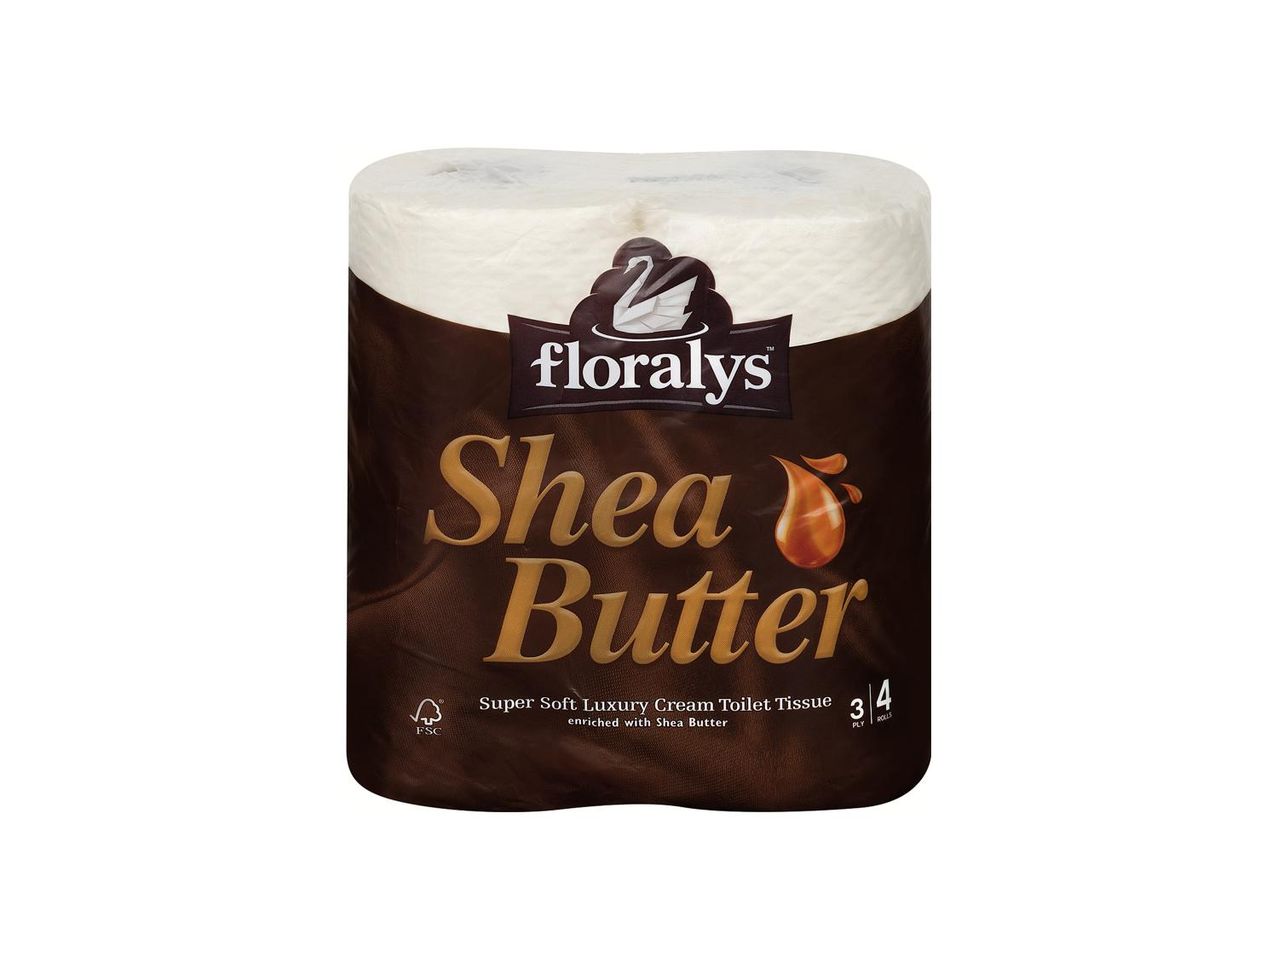 Go to full screen view: Floralys Shea Butter Toilet Tissue - Image 1